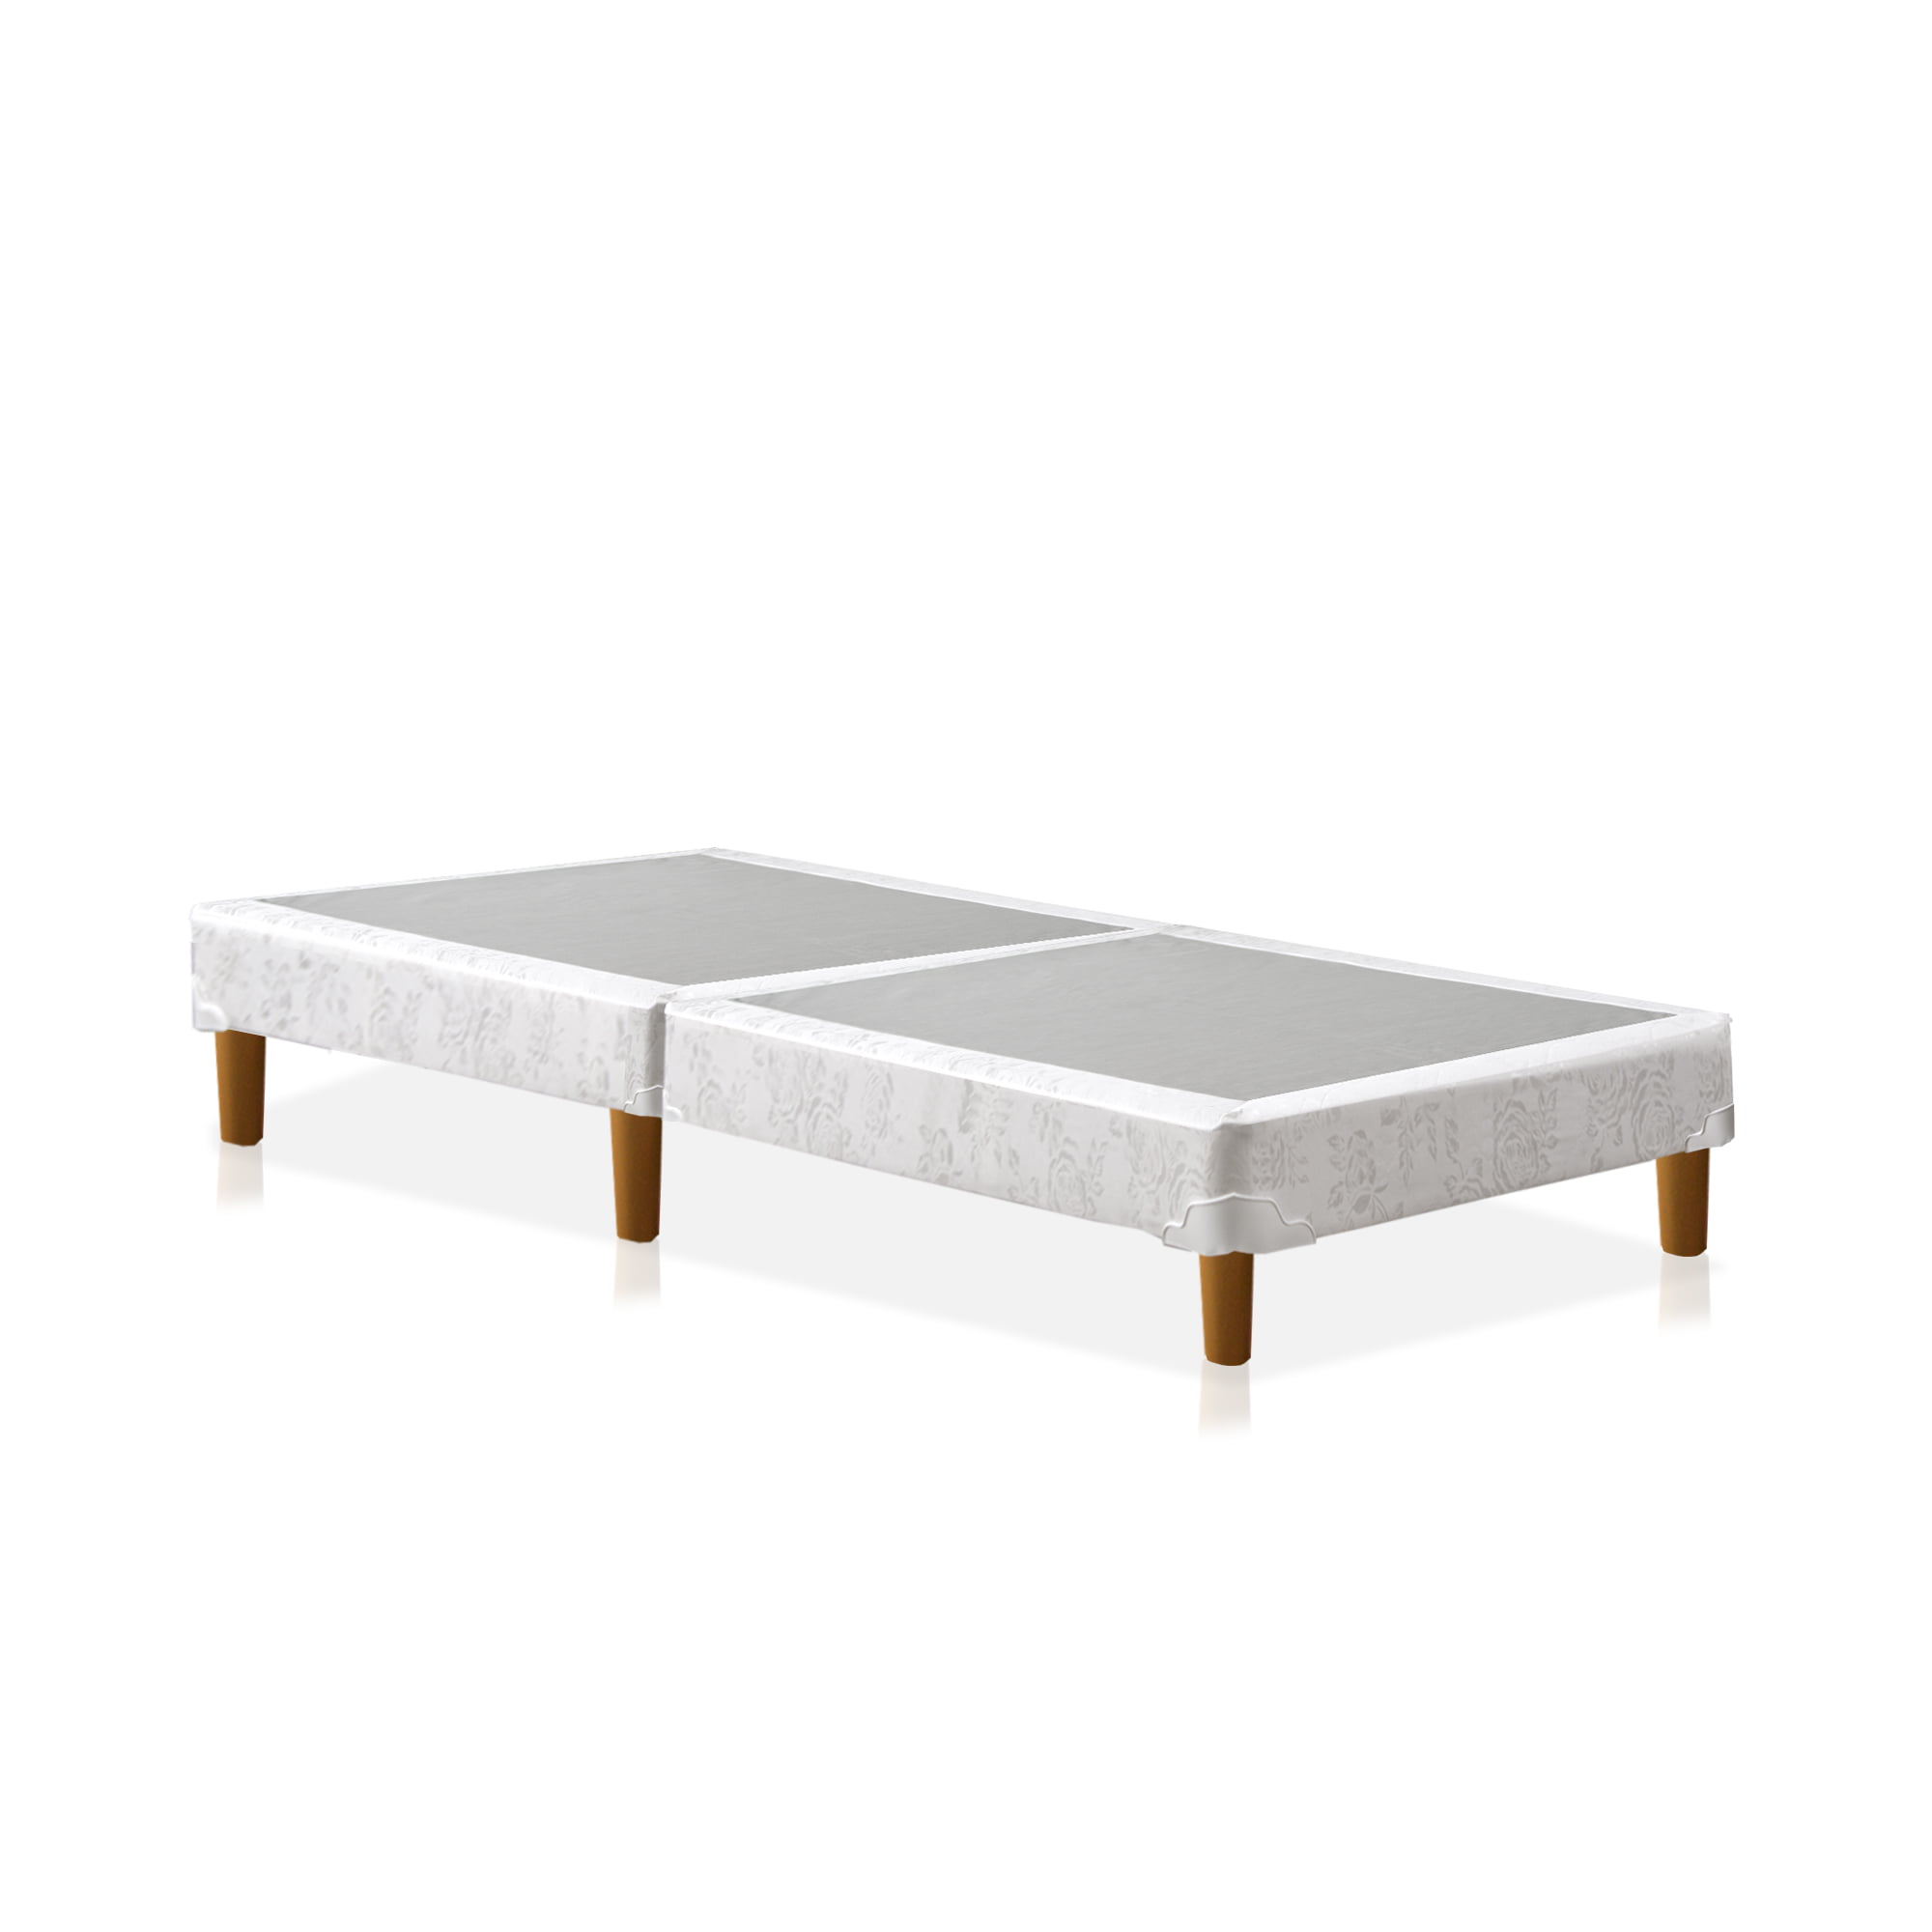 Greaton Assembled Long Lasting 4-inch Box Spring for Mattress Full Size 74,